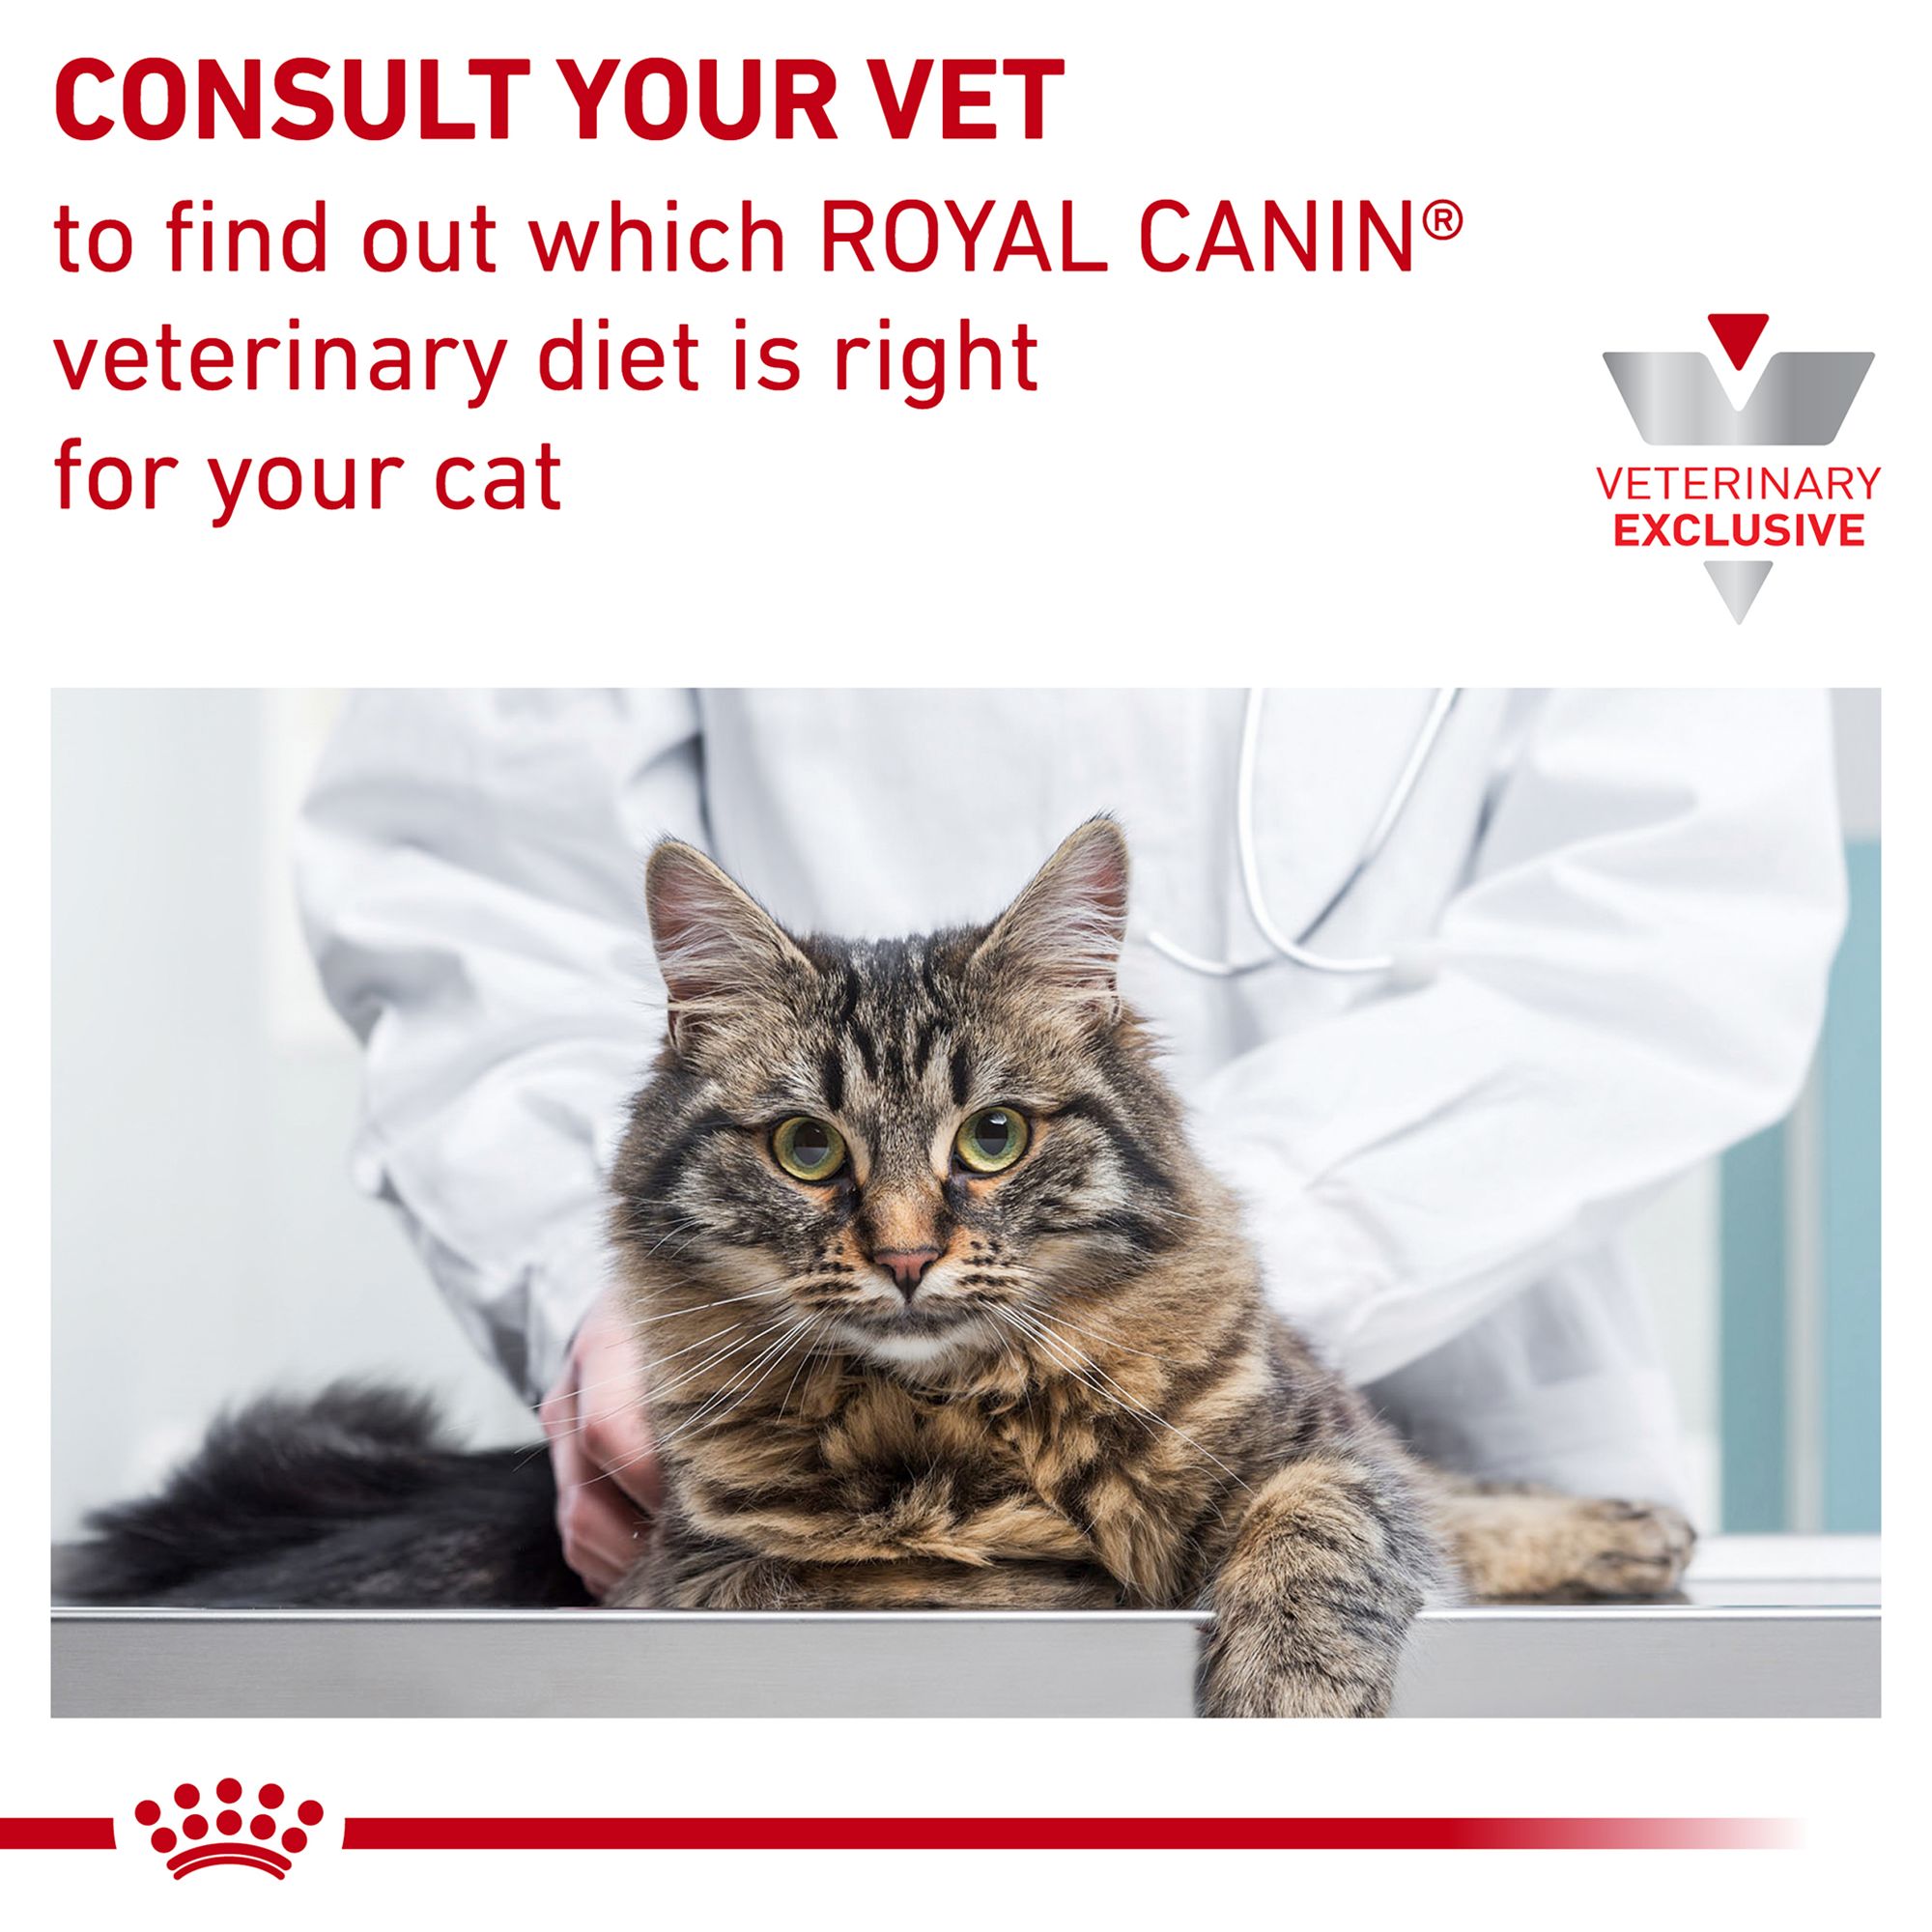 royal canin selected protein cat food